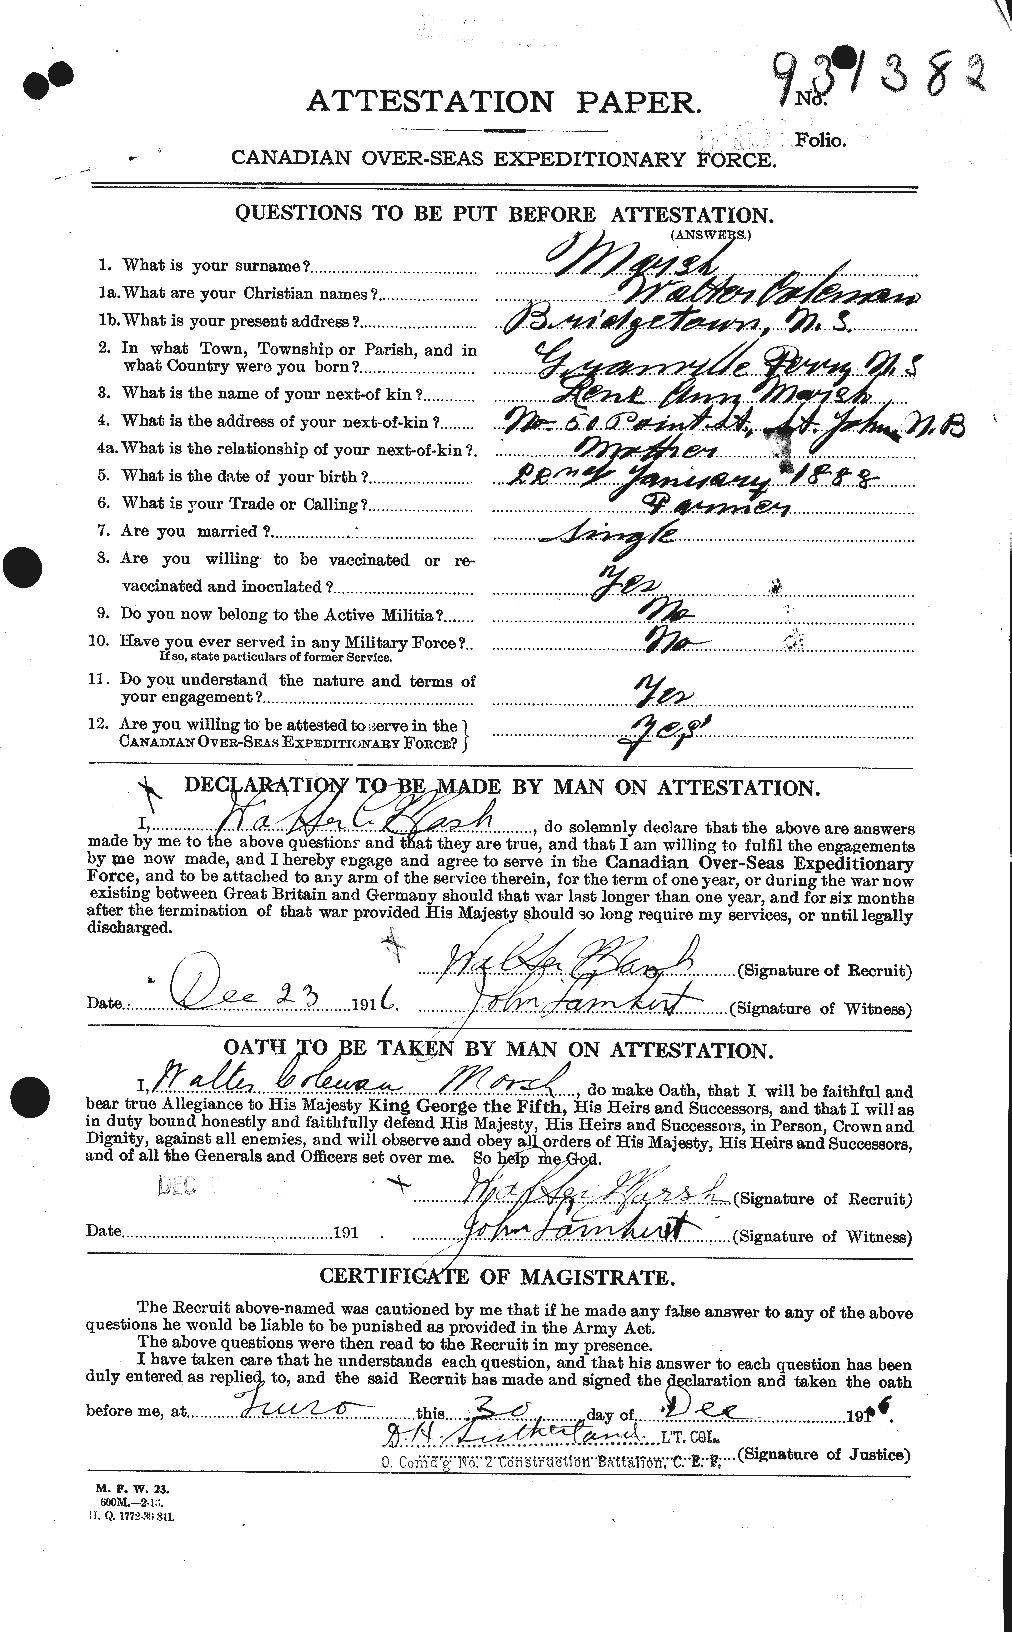 Personnel Records of the First World War - CEF 495646a